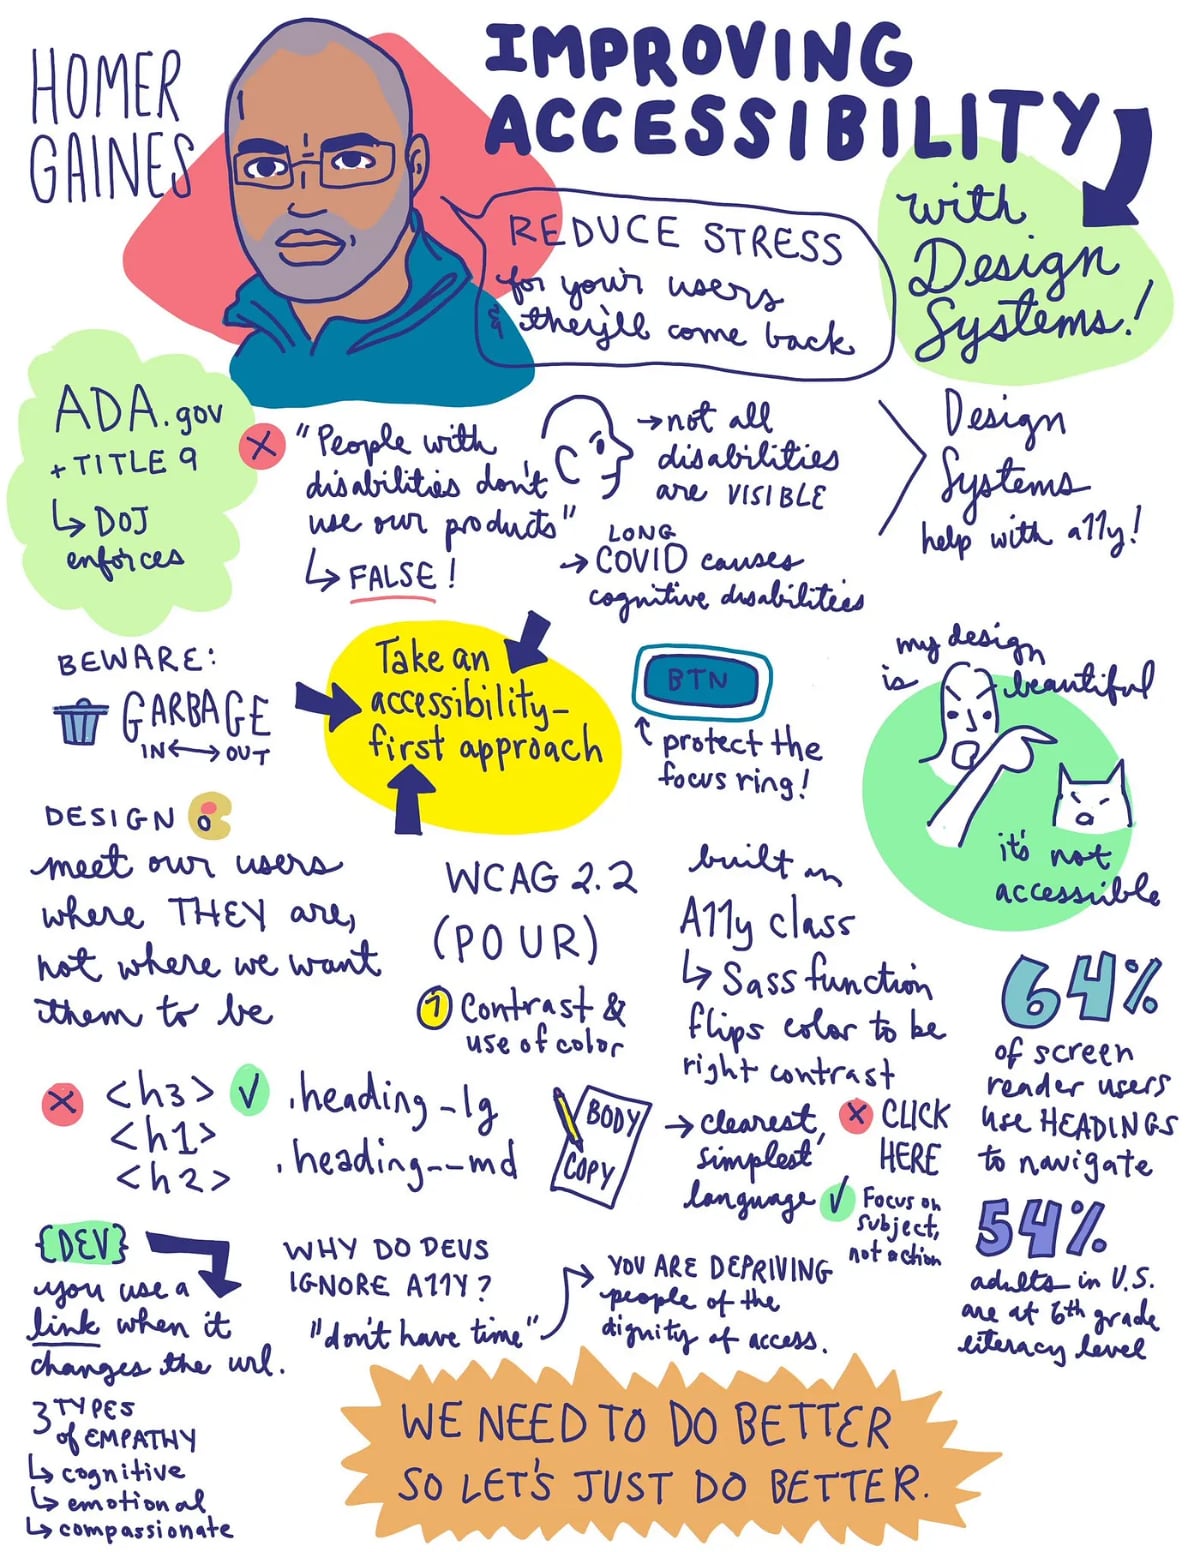 Sketchnotes for Homer Gaines talks "Improving Accessibility with Design Systems"